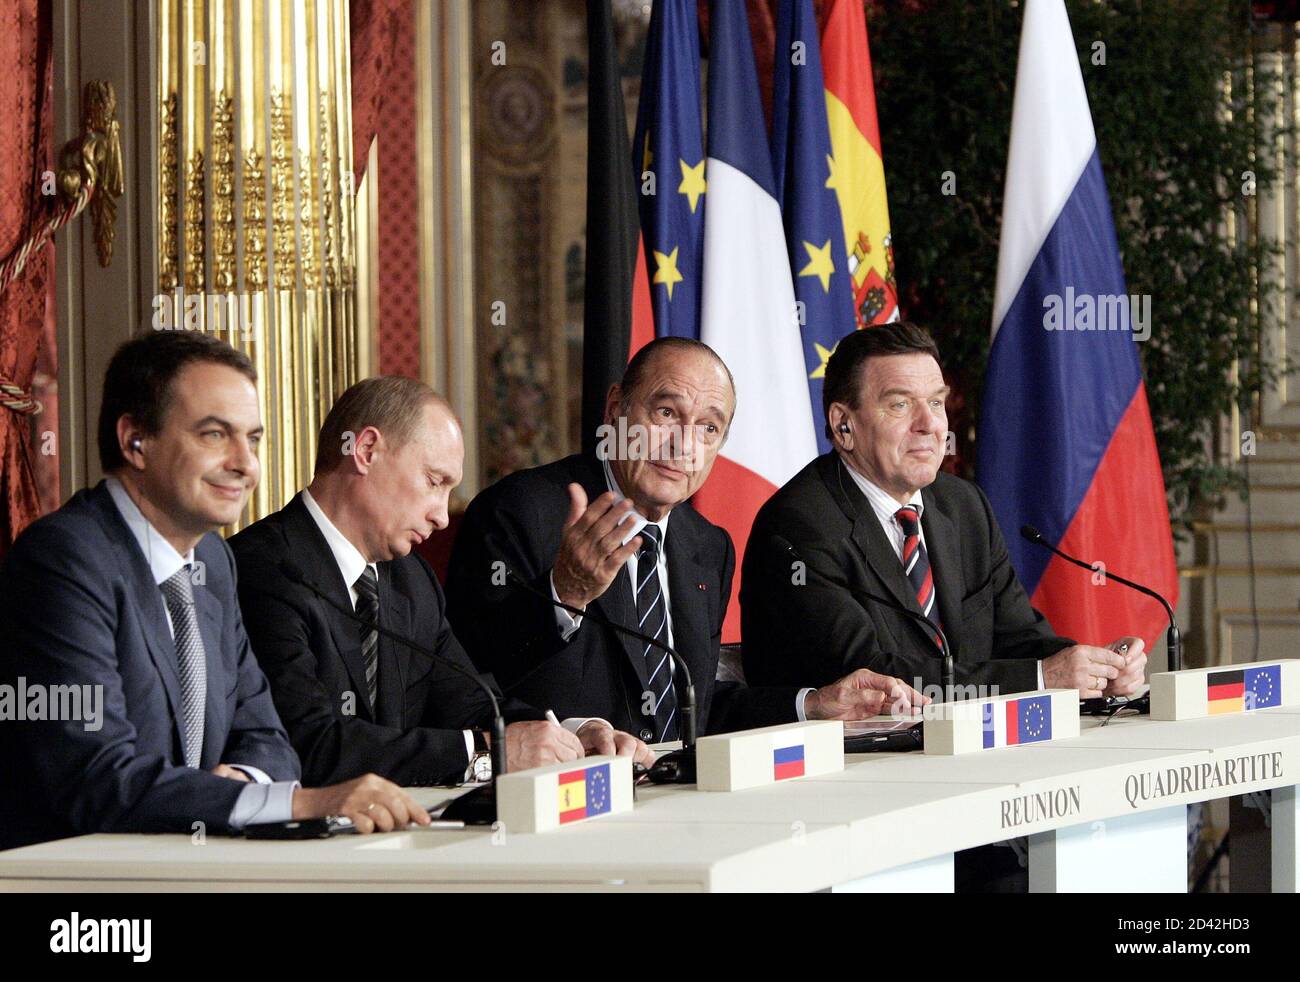 French President Jacques Chirac (2nd R), asks for questions during a press conference with Spanish Prime Minister Jose Luis Rodriguez Zapatero (L), Russian President Vladimir Putin (2nd L) and German Chancellor Gerhard Schroeder (R) after a meeting at the Elysee Palace in Paris March 18, 2005. Stock Photo